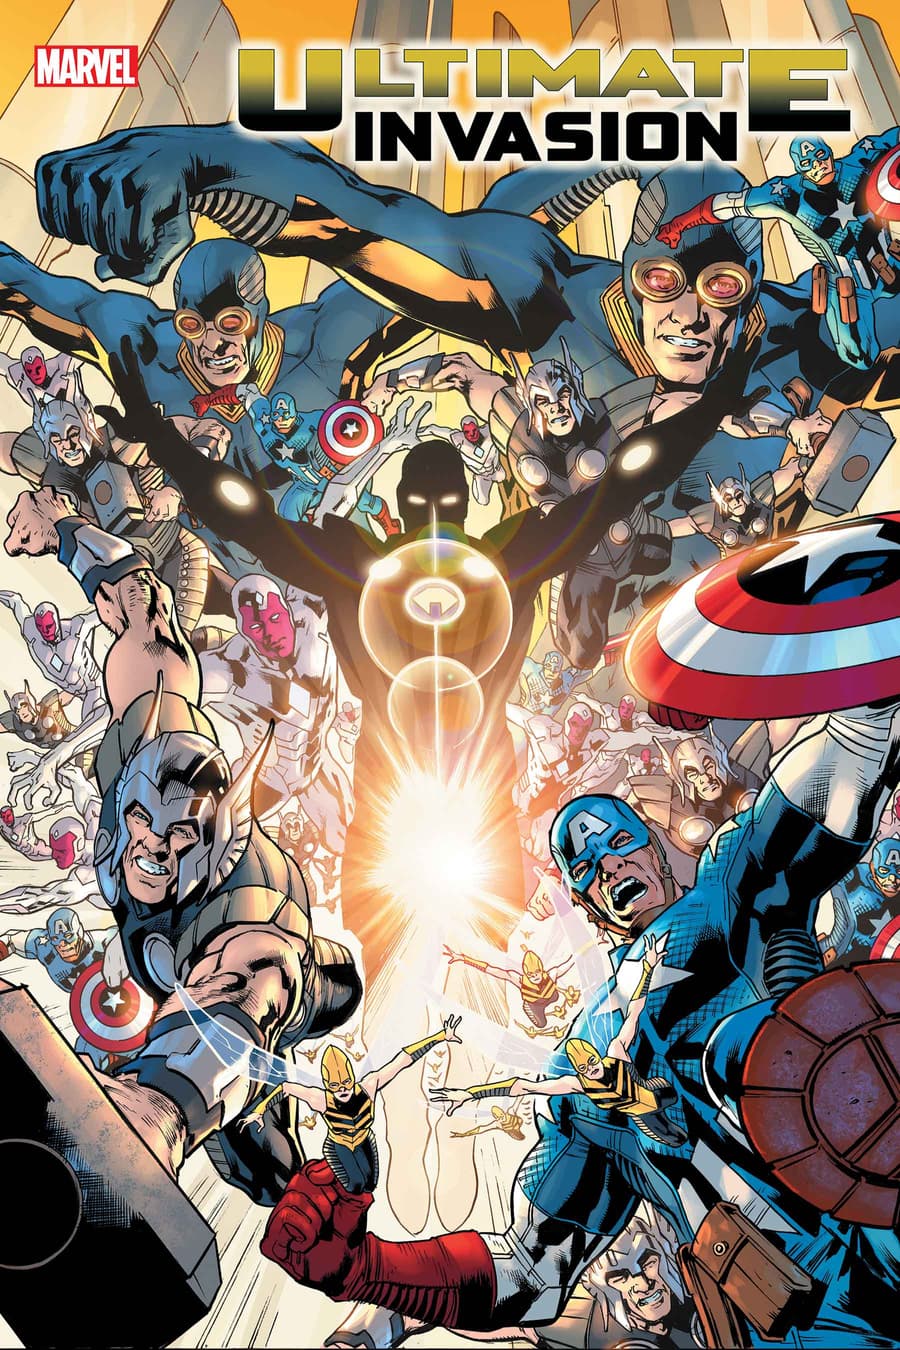 ULTIMATE INVASION #4 cover by Bryan Hitch